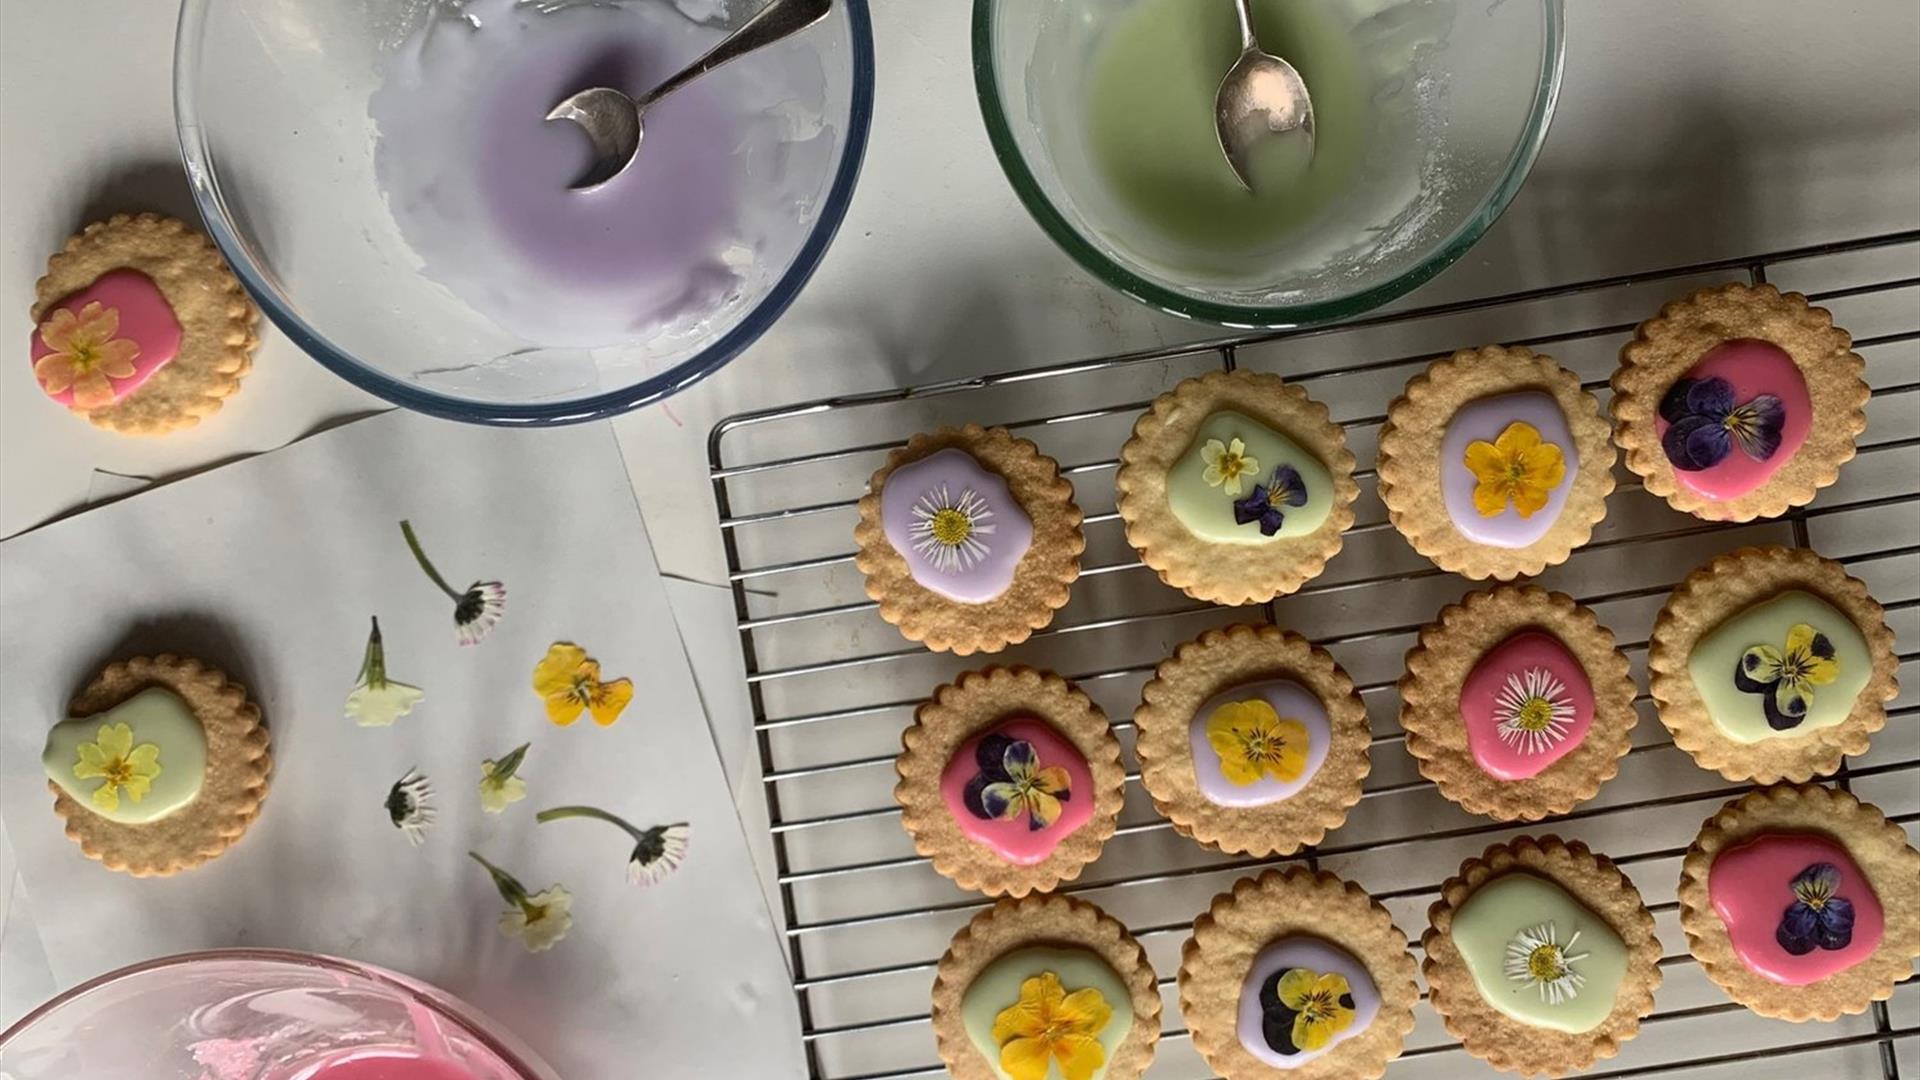 Image shows bowls of pastel coloured icing and some biscuits decorated with the iciing and with little edible flowers.